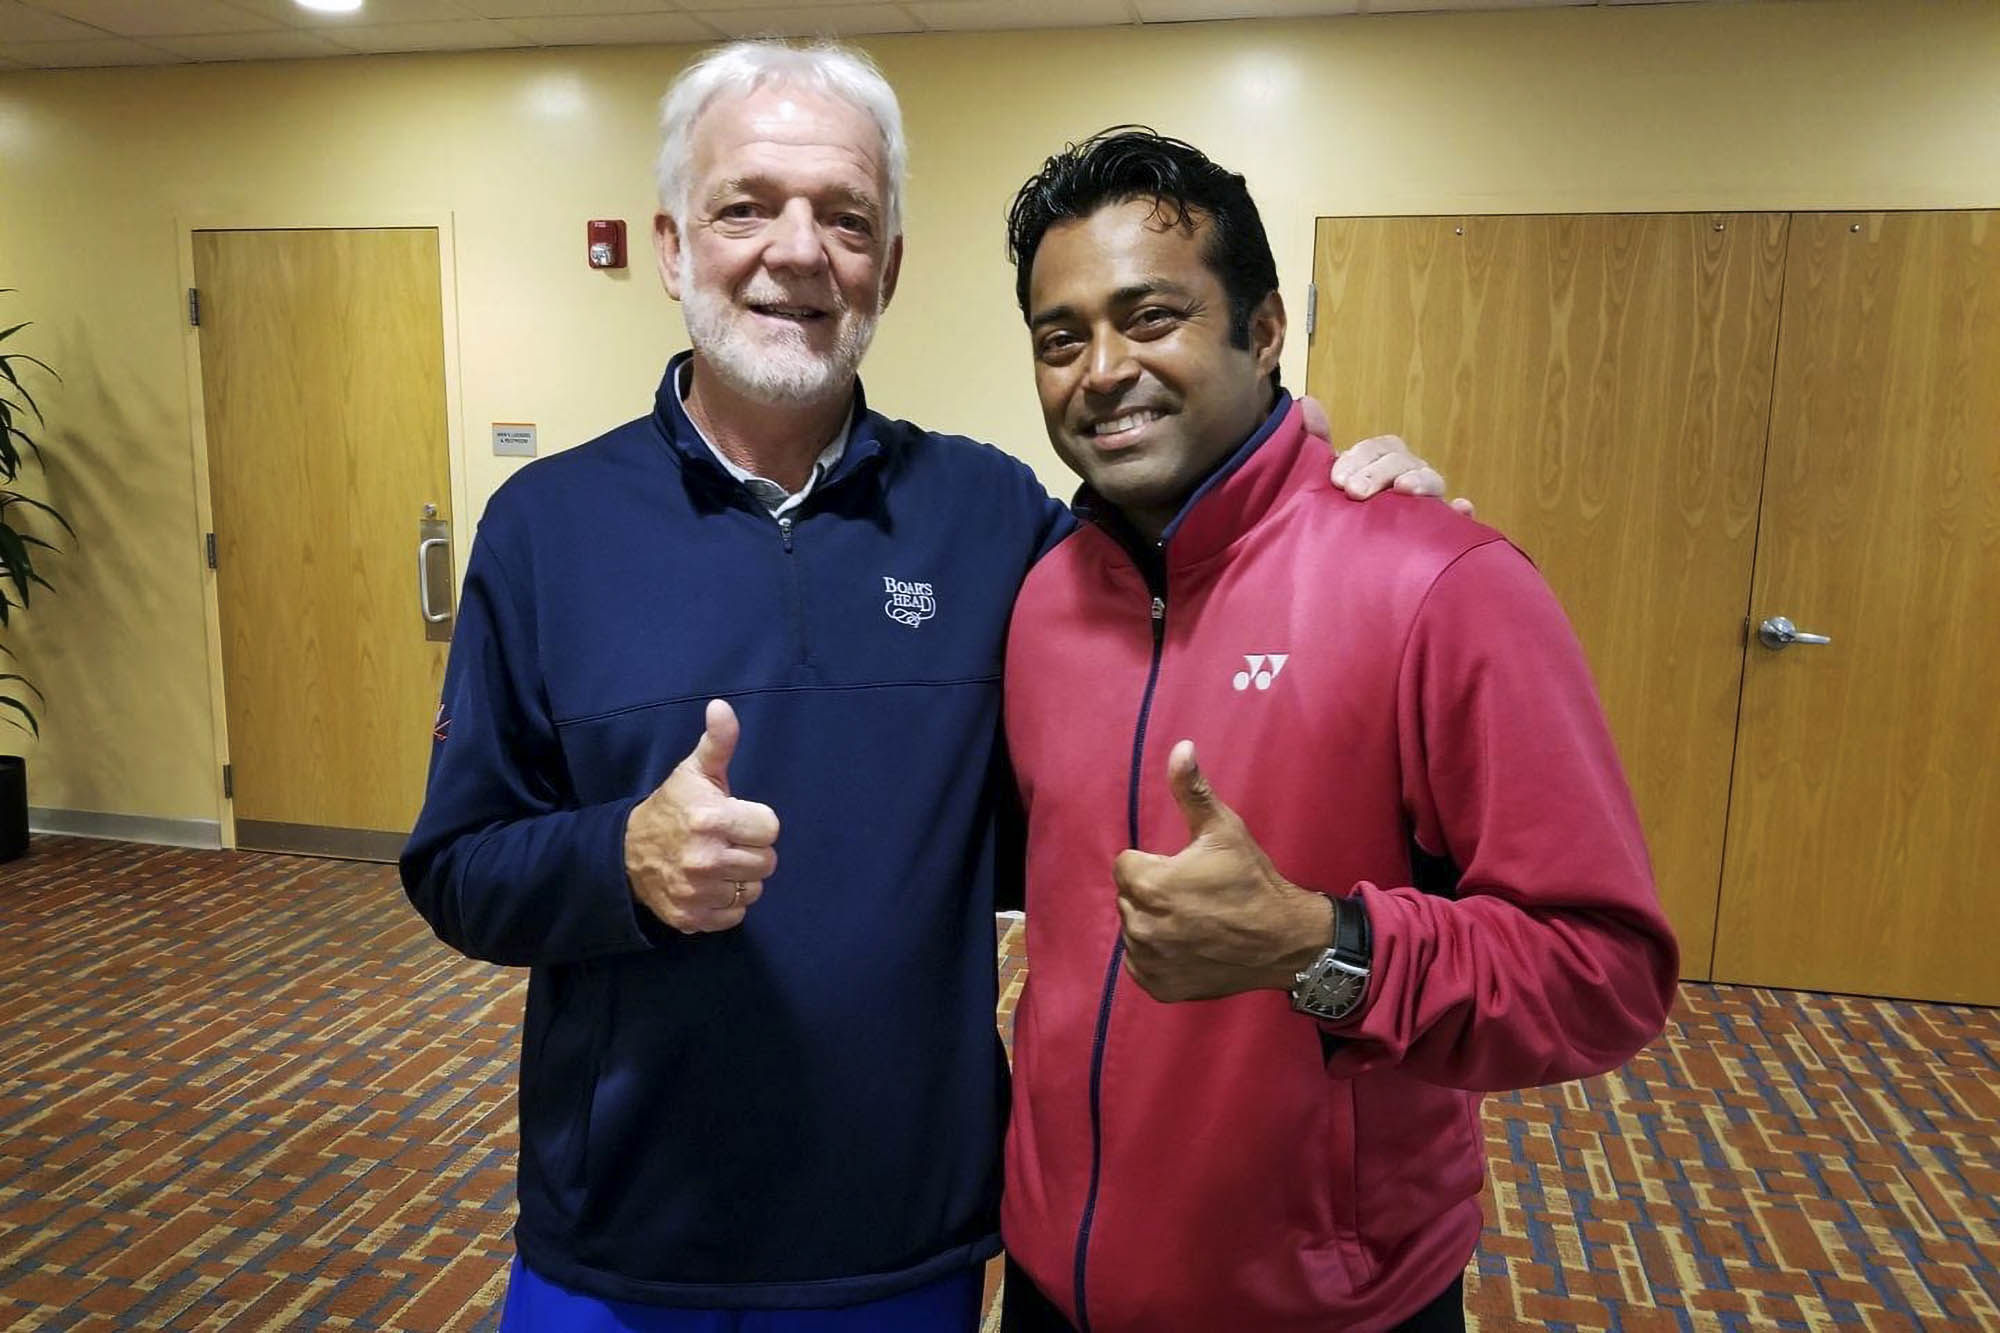 Manilla, left, and Leander Paes, right, give thumbs up to the camera